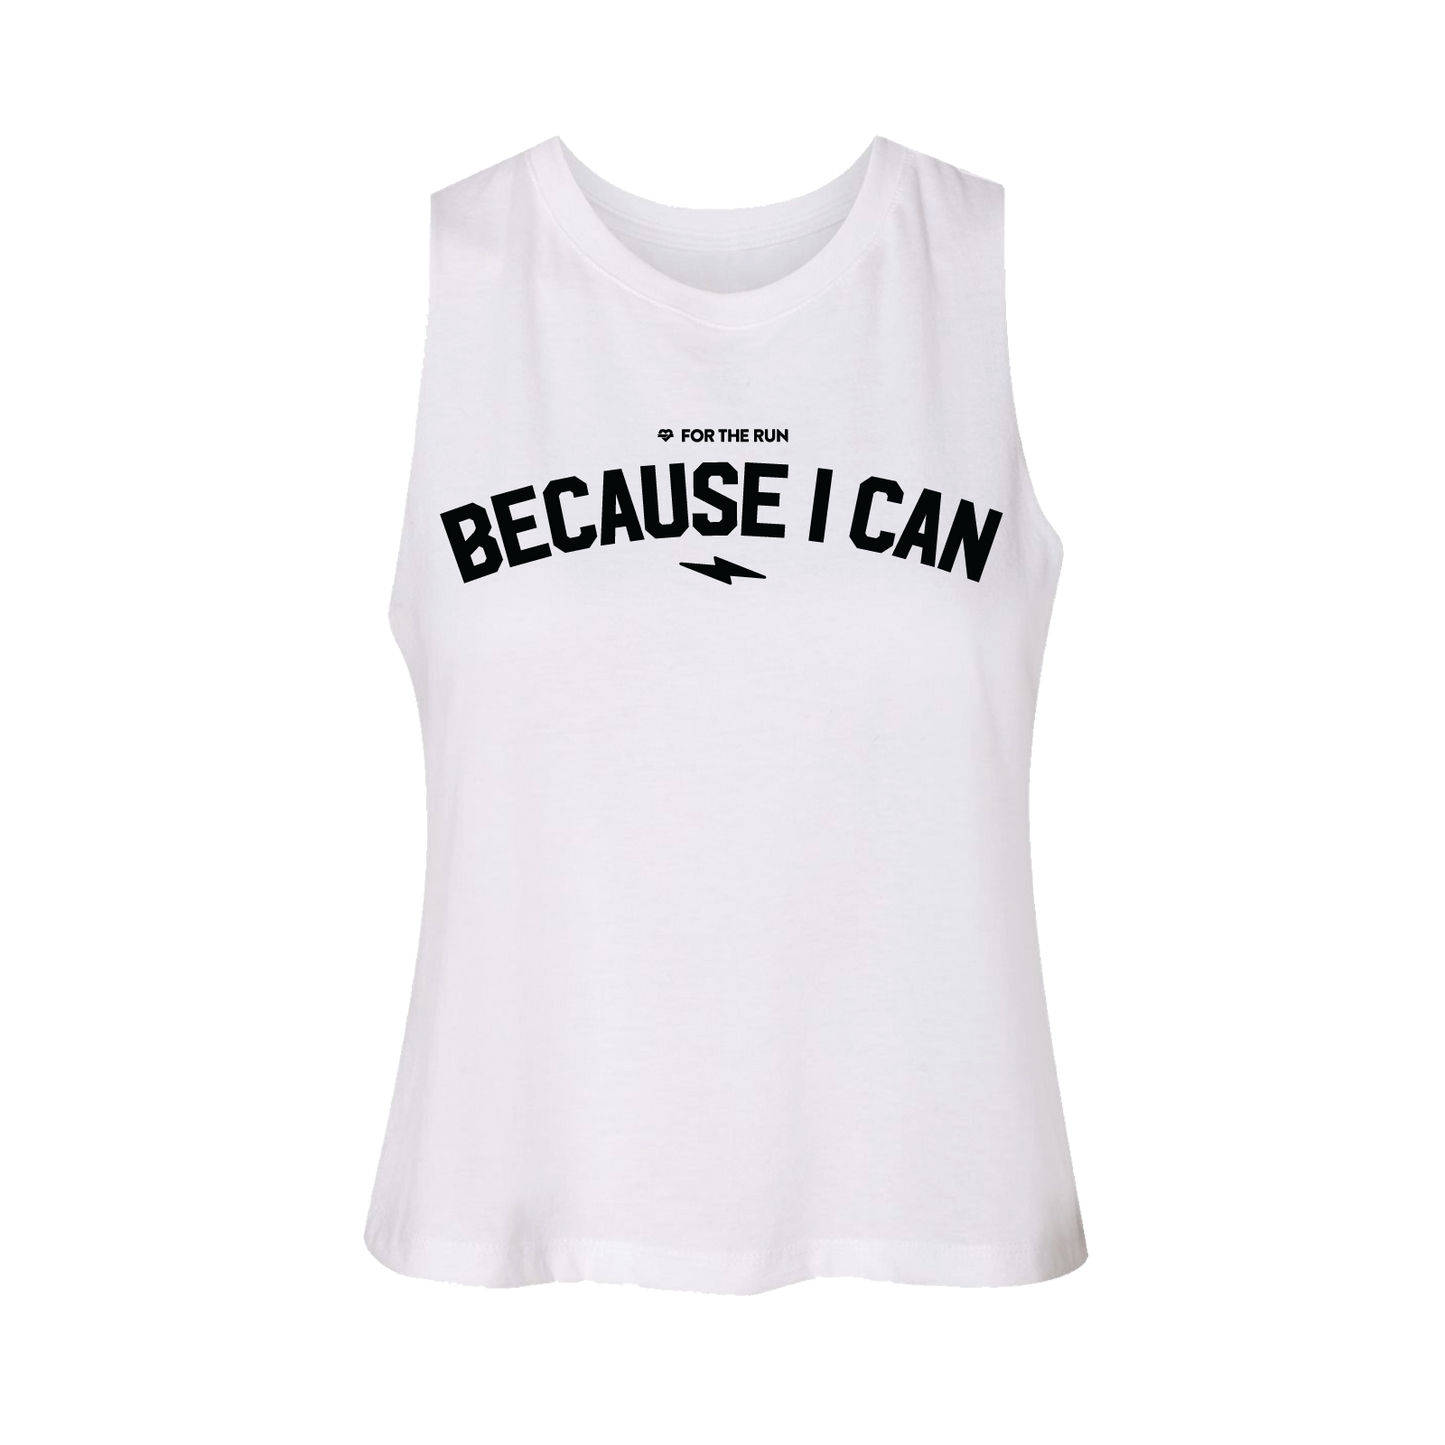 Because I Can - Women's